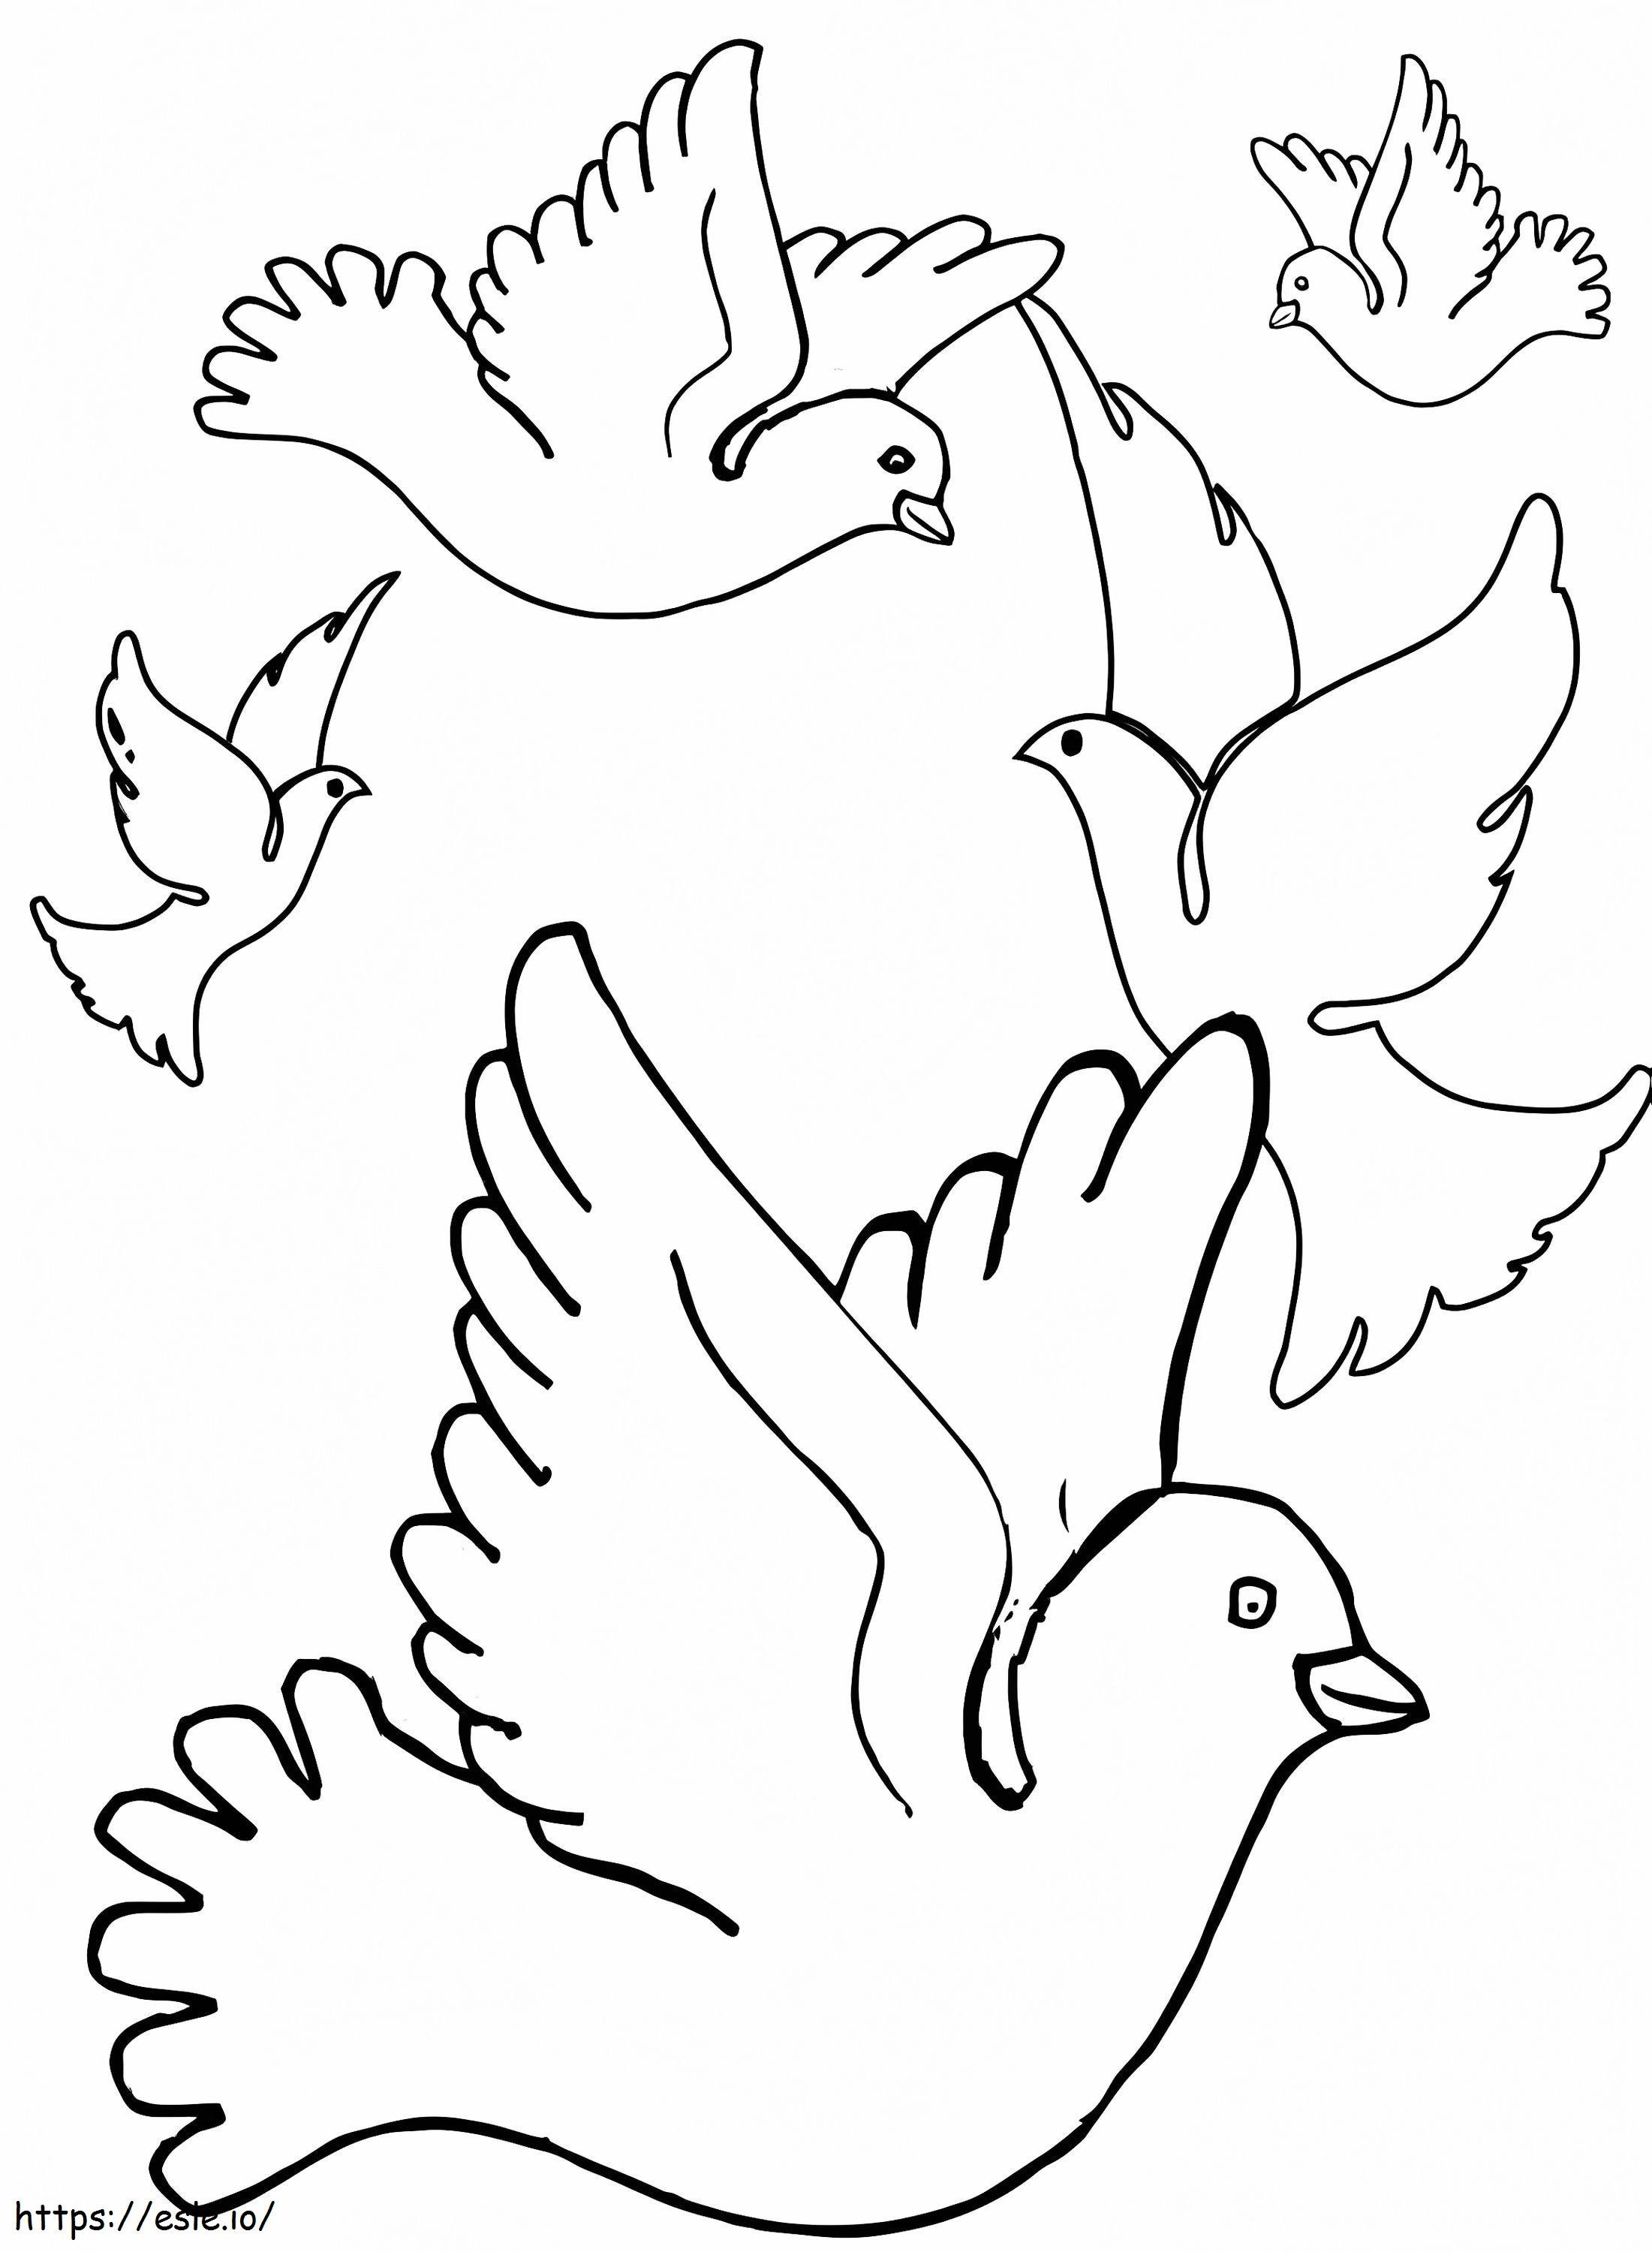 Flock Of Pigeons coloring page